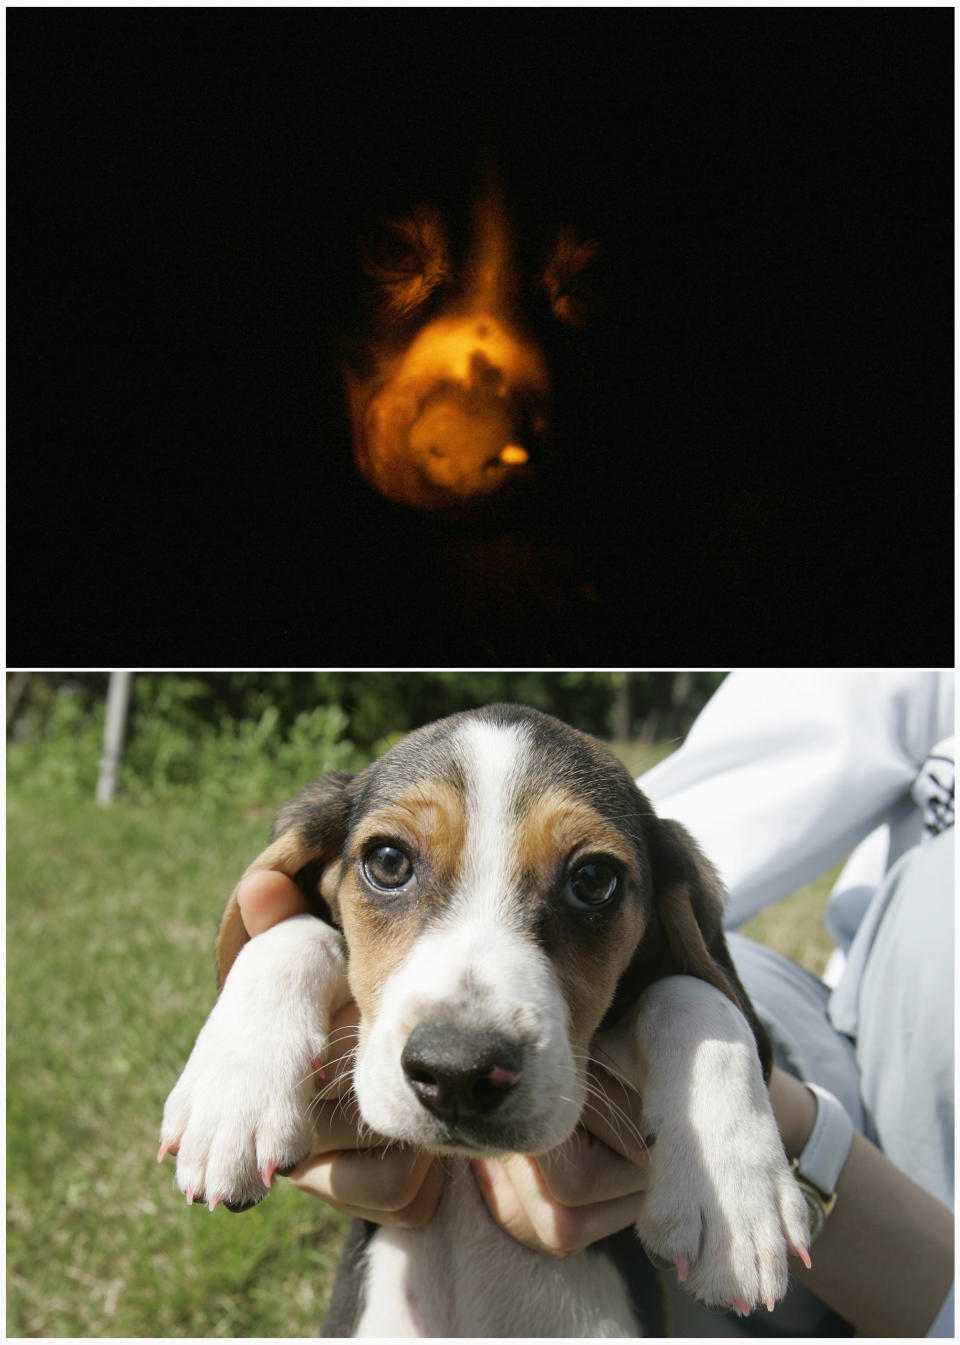 A combination photo shows a cloned fluorescent puppy, a three-month-old beagle, glowing in the dark under ultra-violet light (top) and under daylight (bottom) at Seoul National University's College of Veterinary Medicine in Seoul May 13, 2009. The puppy is one of "2nd generation Ruppies", offspring of "Ruppy", the world's first transgenic dog which carries fluorescent genes. They took a fluorescent protein, much like that produced by some sea anenomes, and inserted it into the cell of a beagle. The name "Ruppy" is a combination of the words "Ruby" and "Puppy", and the offsprings of such dogs will possess the same fluorescent gene as their mothers. REUTERS/Jo Yong-Hak